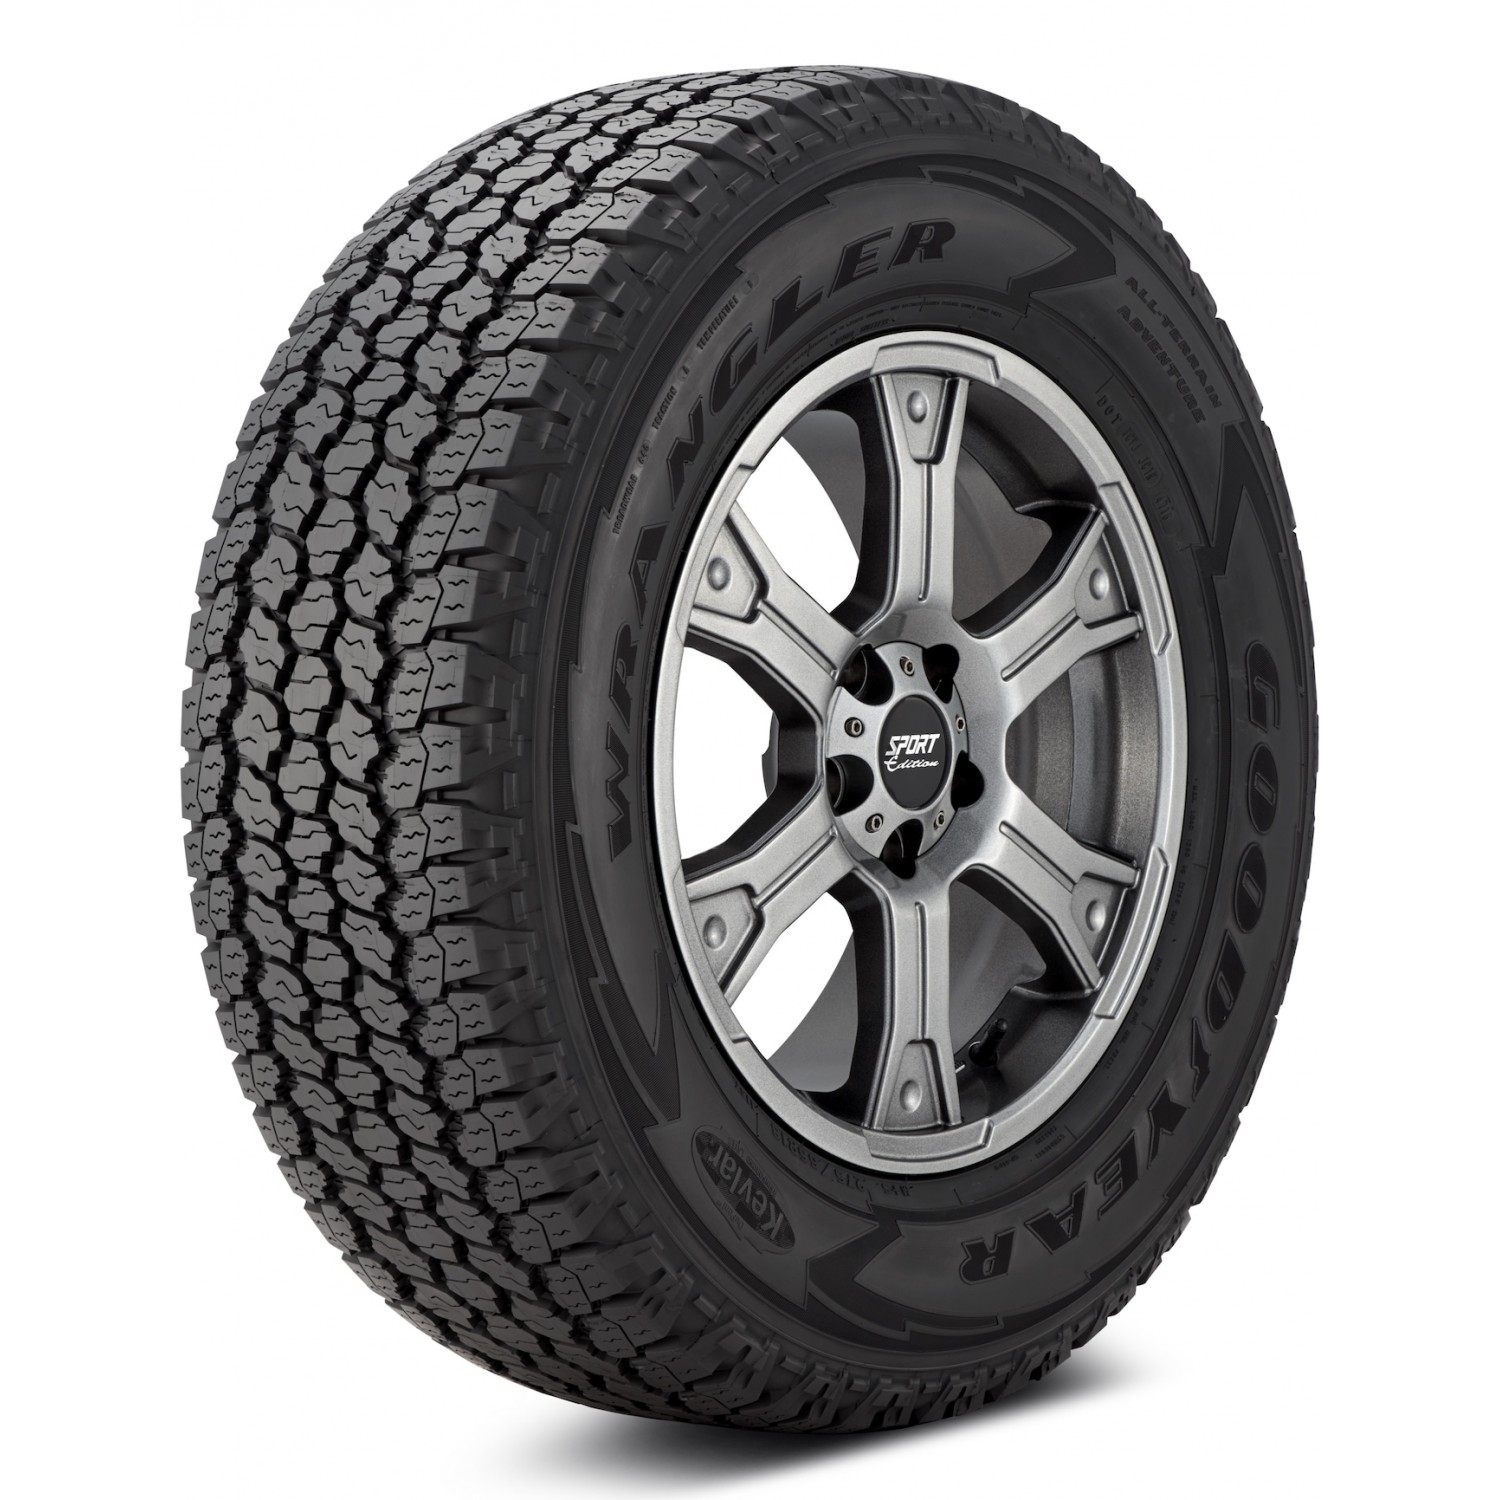 Goodyear Wrangler AT Adventure With Kevlar Black Sidewall Tire (275/55R20  113T) vzn121230